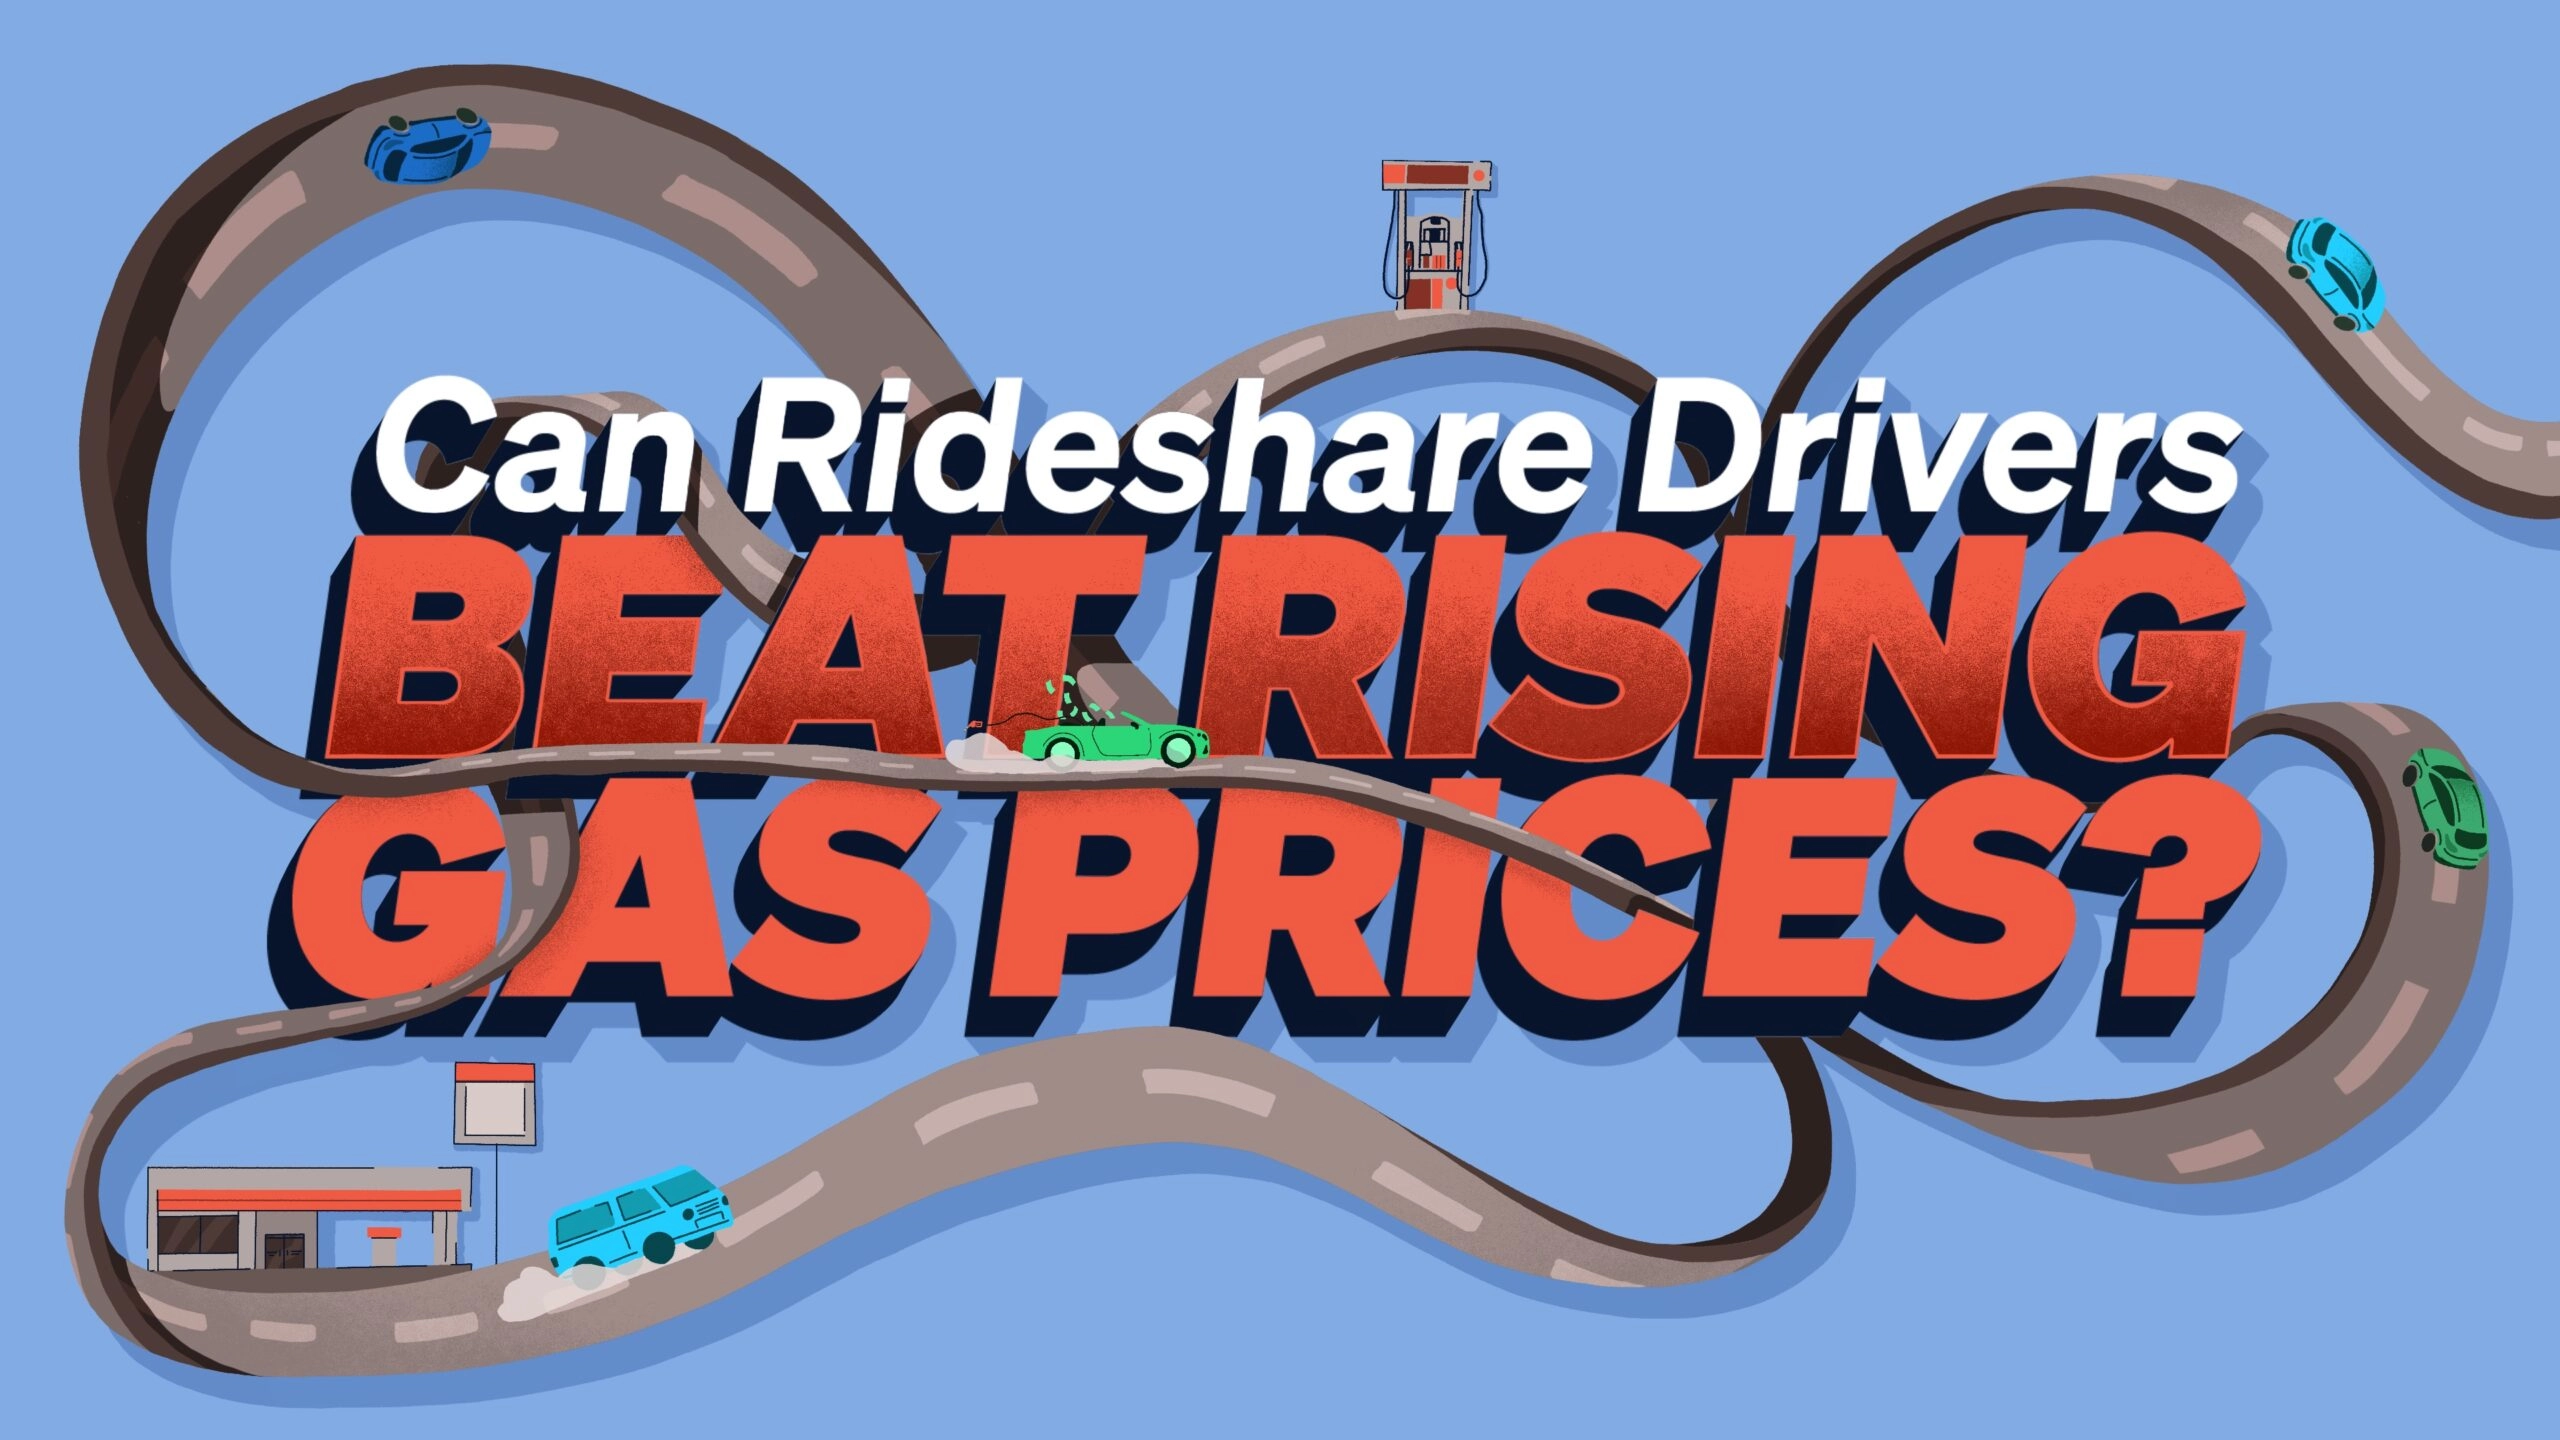 rideshare drivers title